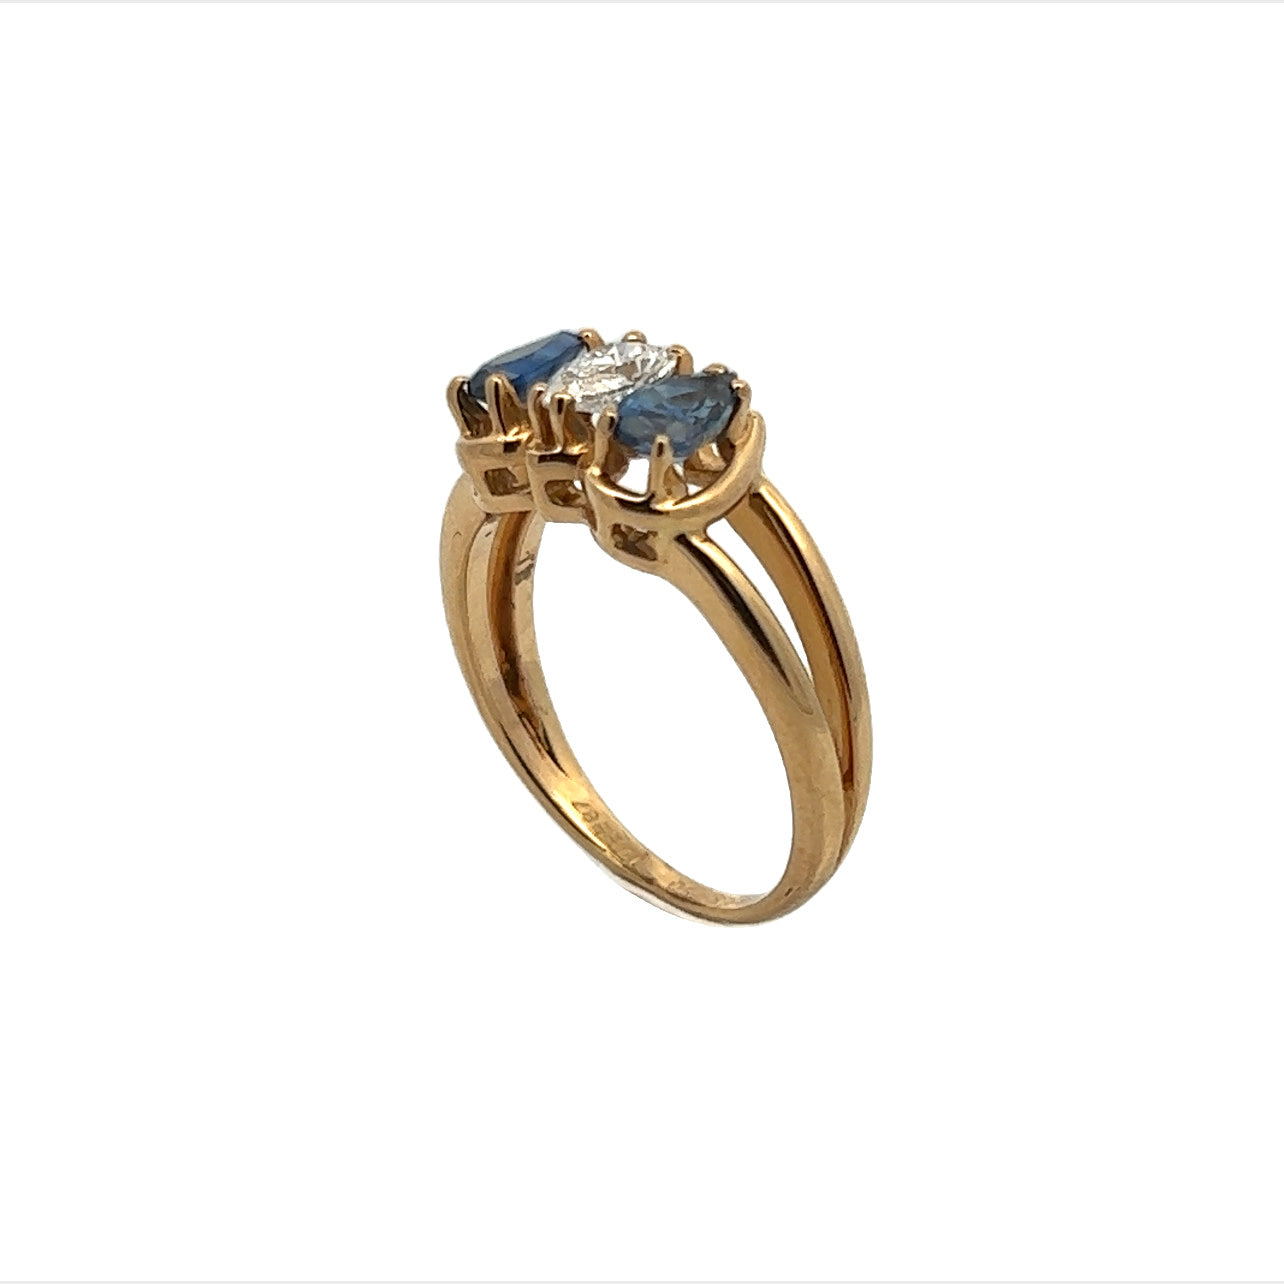 Chaumet 1950s 18KT Yellow Gold Sapphire & Diamond Ring front profile view